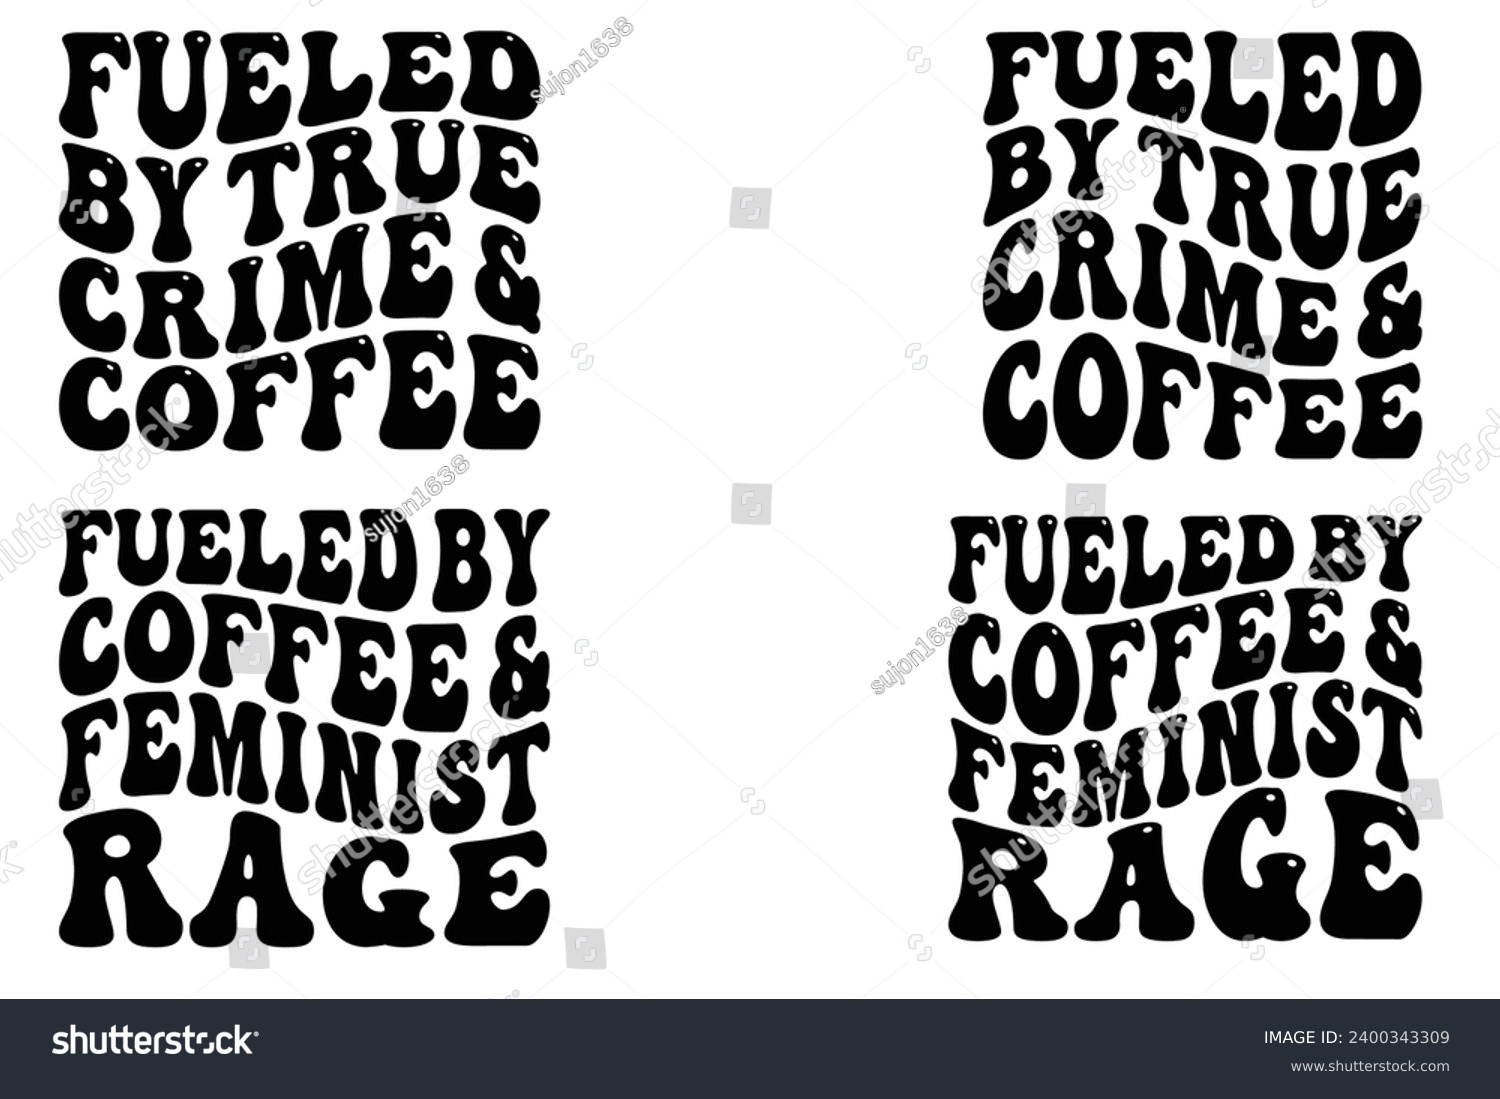 SVG of Fueled by True Crime and Coffee, Fueled by Coffee and Feminist Rage retro wavy T-shirt svg